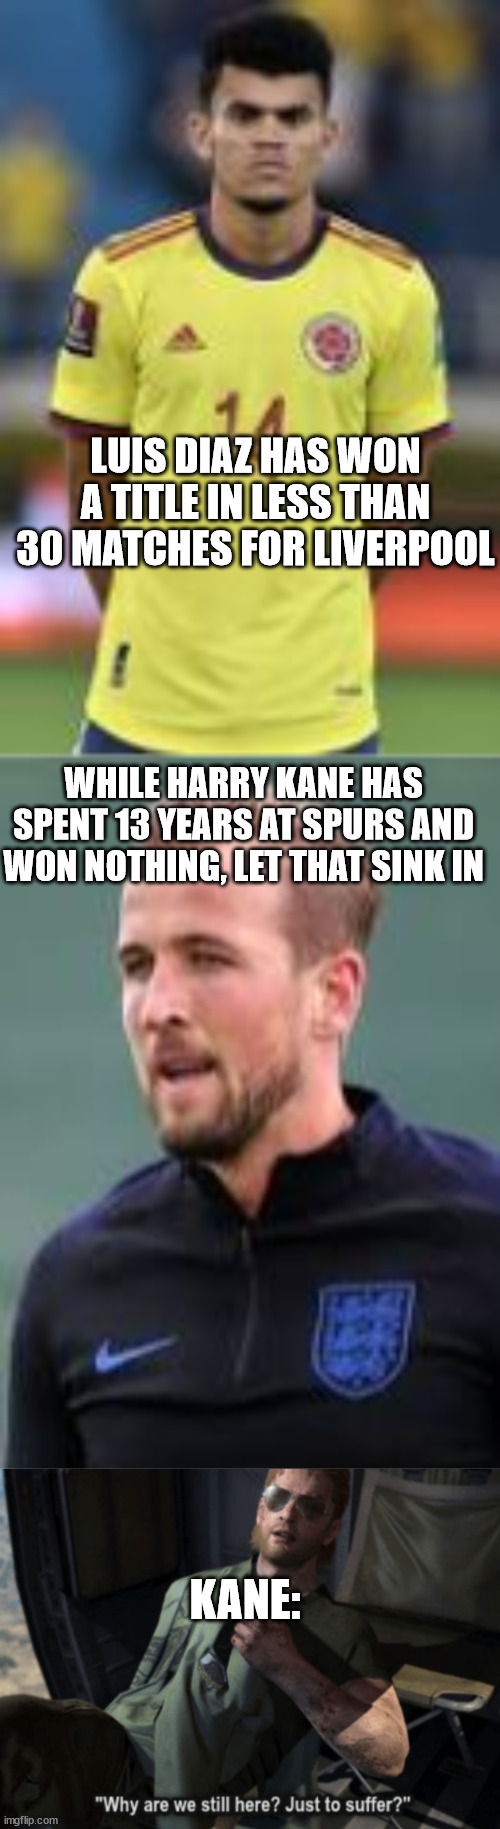 kane deserves better | LUIS DIAZ HAS WON A TITLE IN LESS THAN 30 MATCHES FOR LIVERPOOL; WHILE HARRY KANE HAS SPENT 13 YEARS AT SPURS AND WON NOTHING, LET THAT SINK IN; KANE: | image tagged in why are we still here just to suffer | made w/ Imgflip meme maker